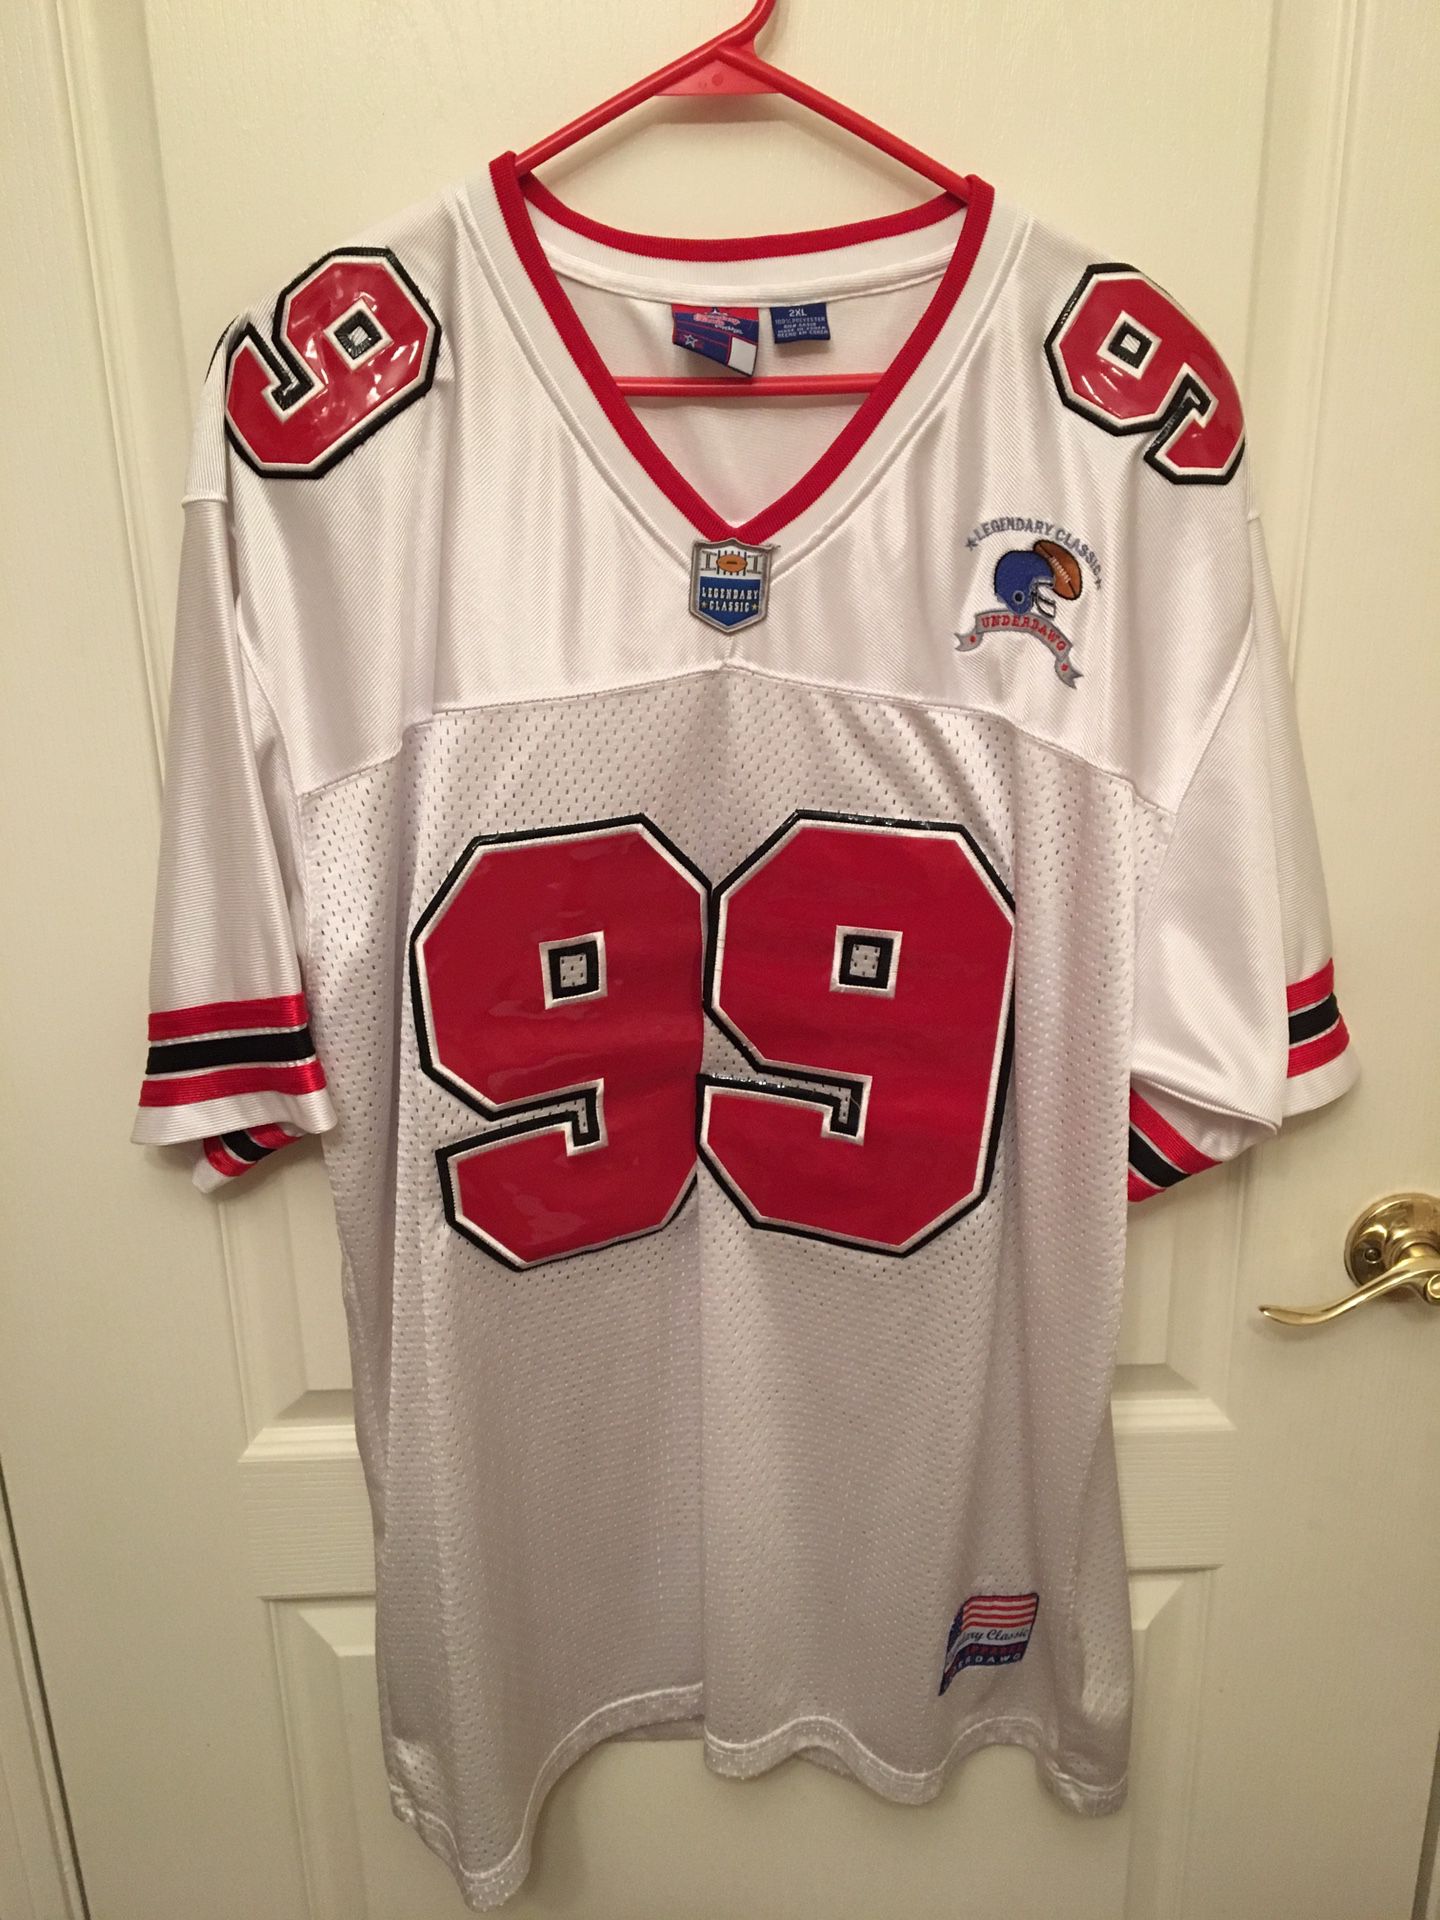 Legendary Classics Jersey number 99; looks brand new REDUCED